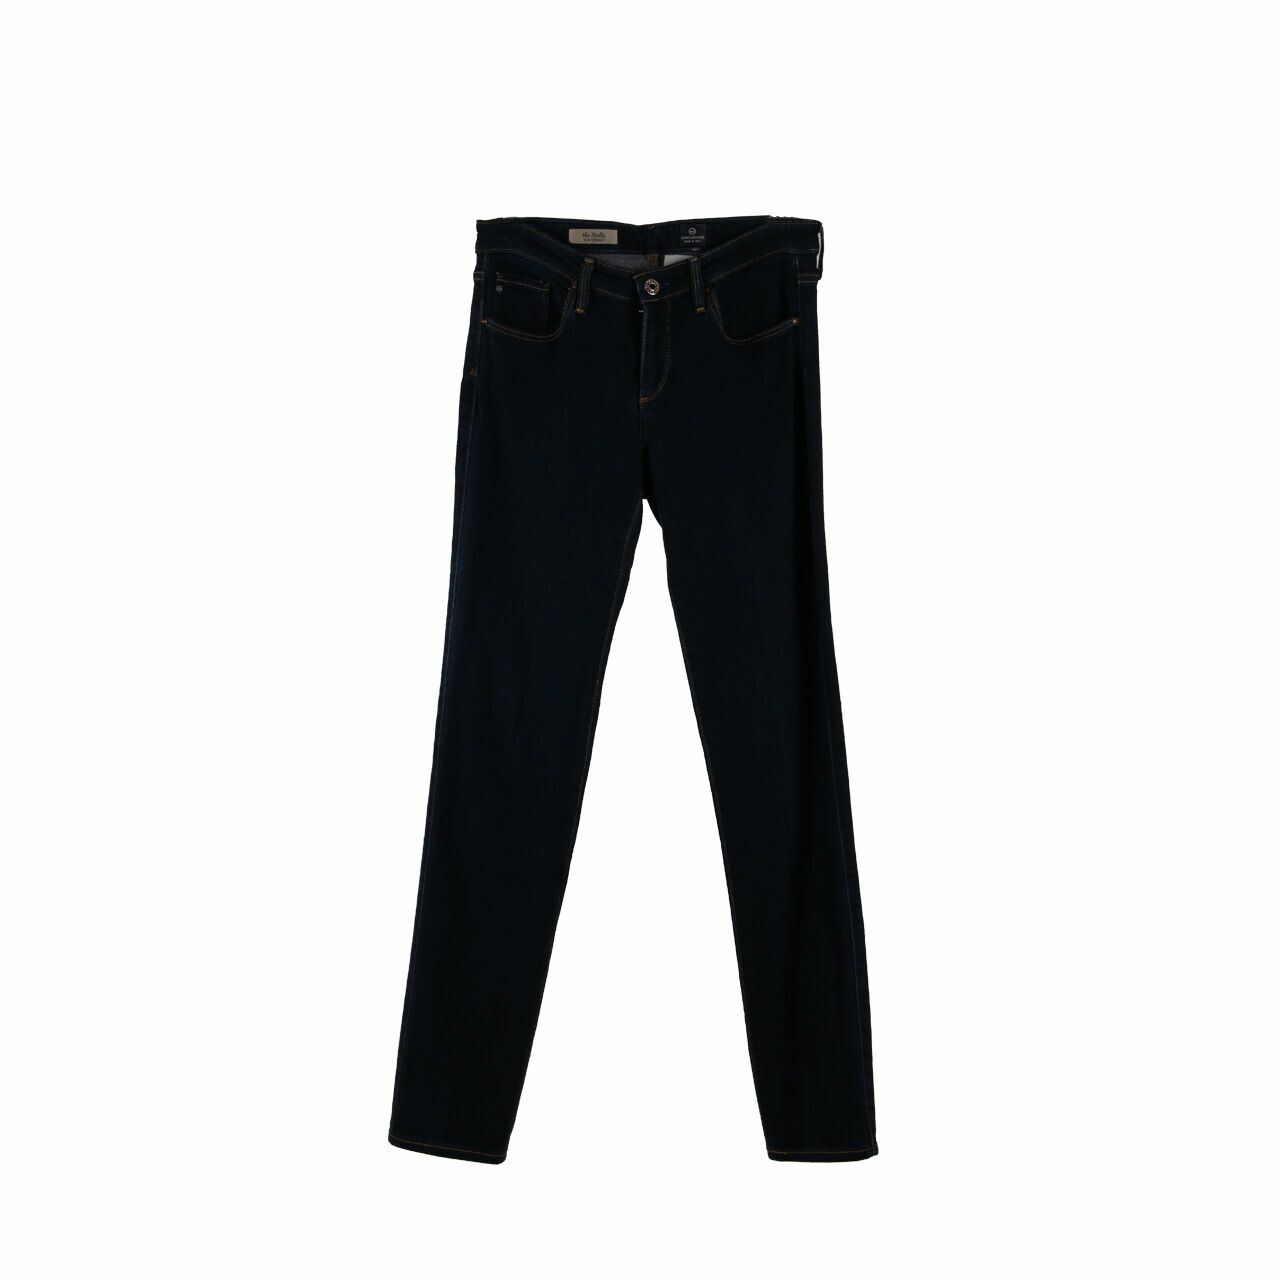 Adriano Goldschmied Navy Jeans Long Pants